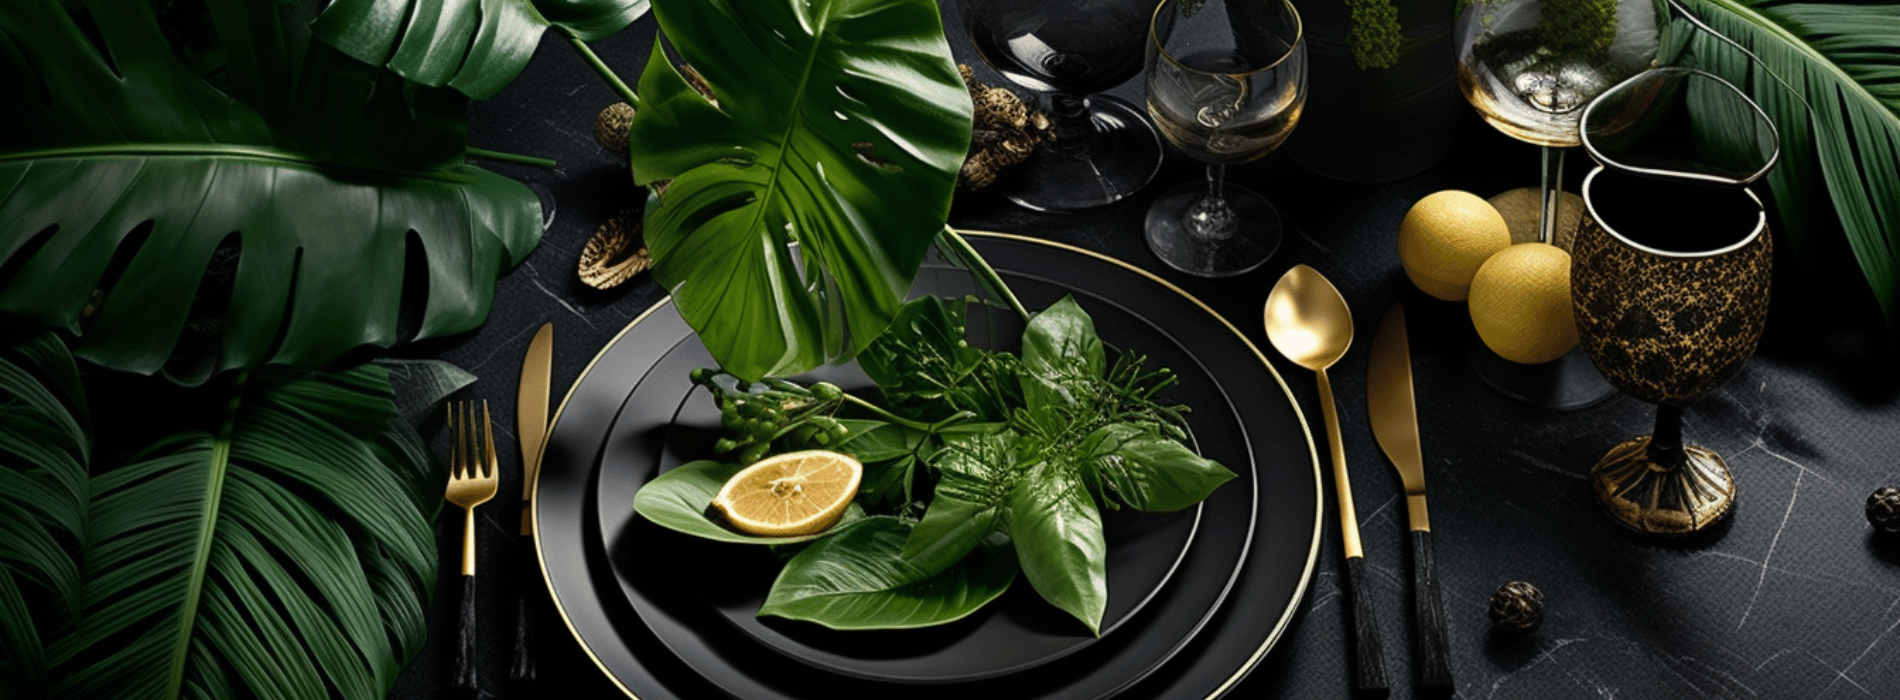 exotic-tropical-table-decor